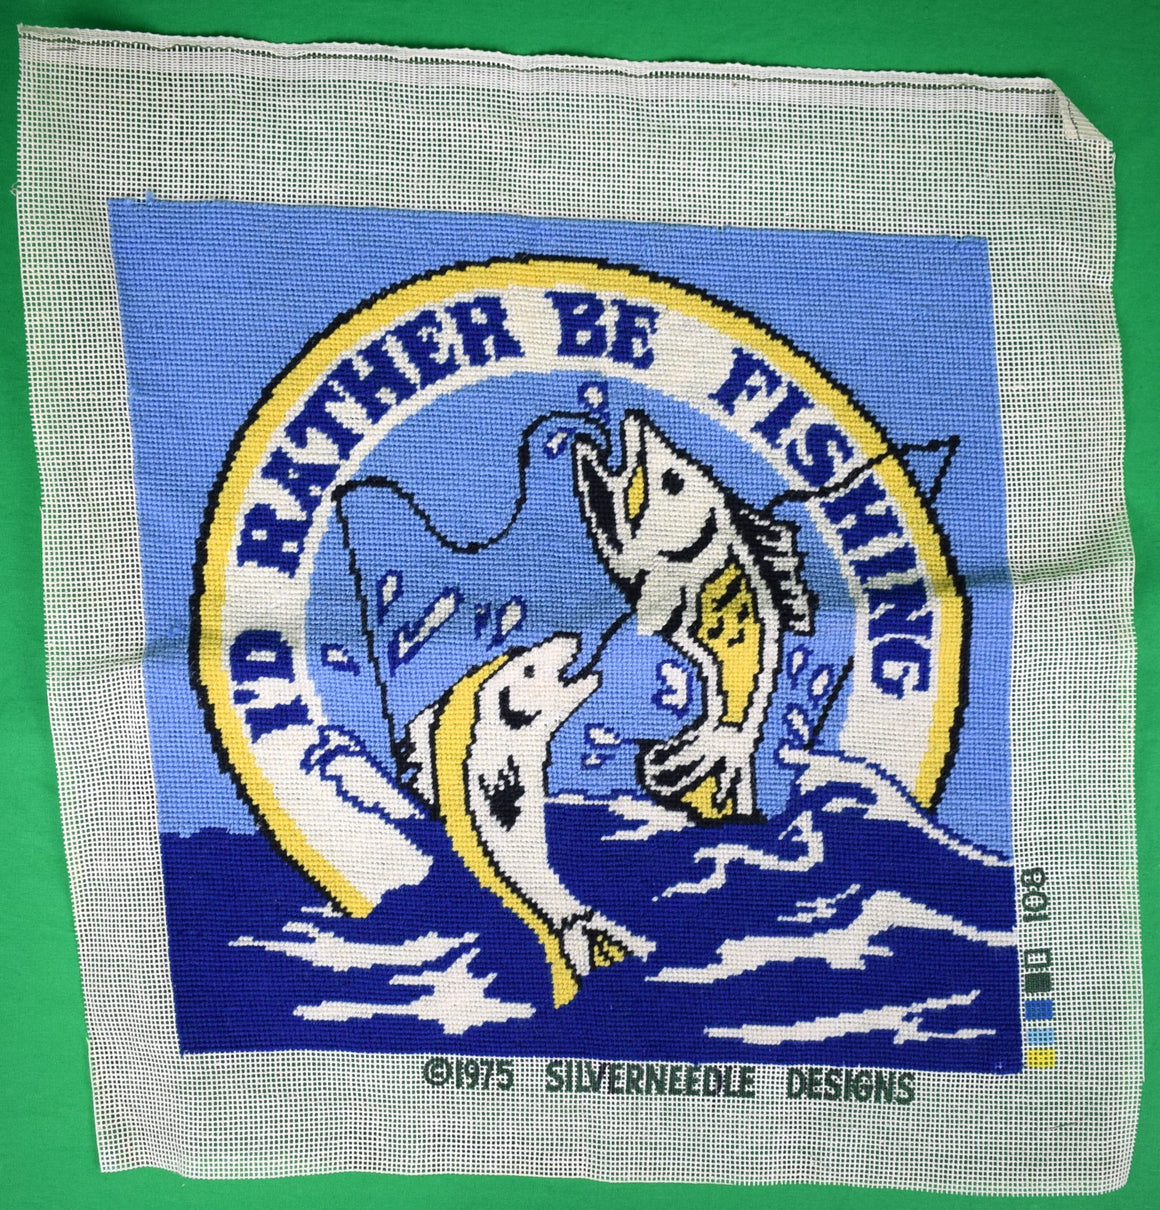 I'd Rather Be Fishing c1975 Needlepoint Pillow Cover On Canvas